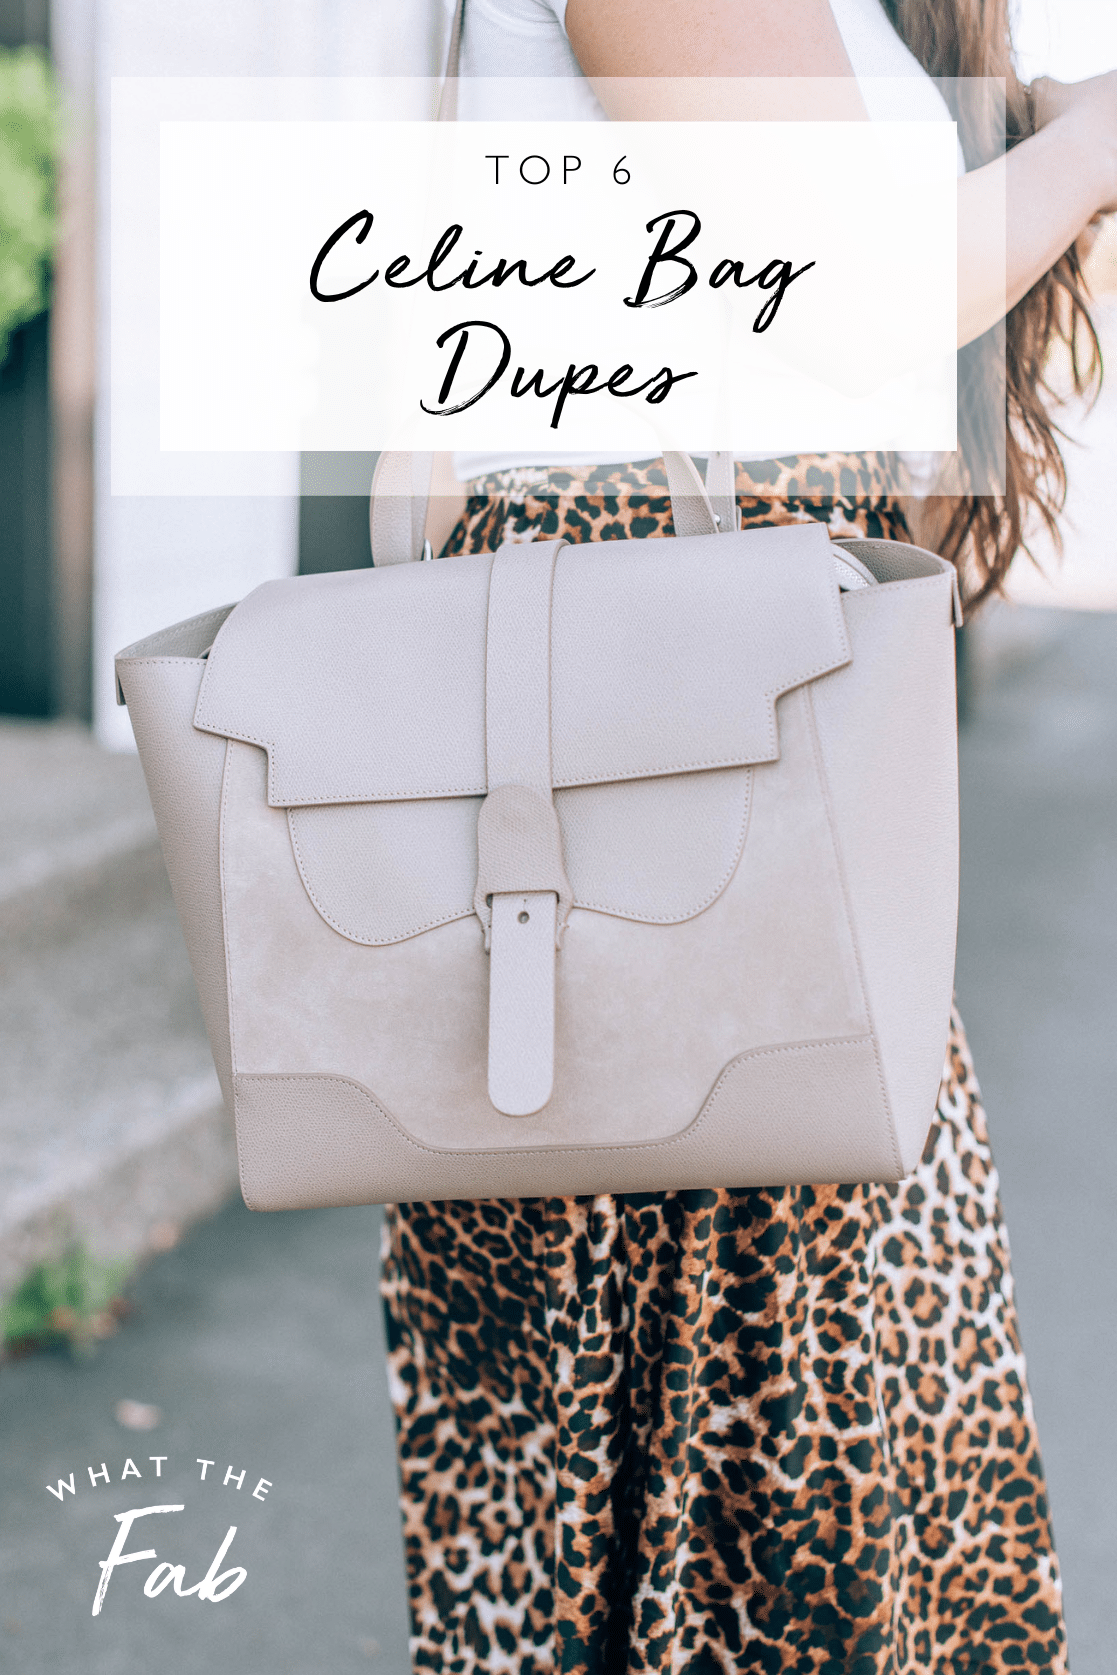 Top Celine bag dupes, by fashion blogger What The Fab